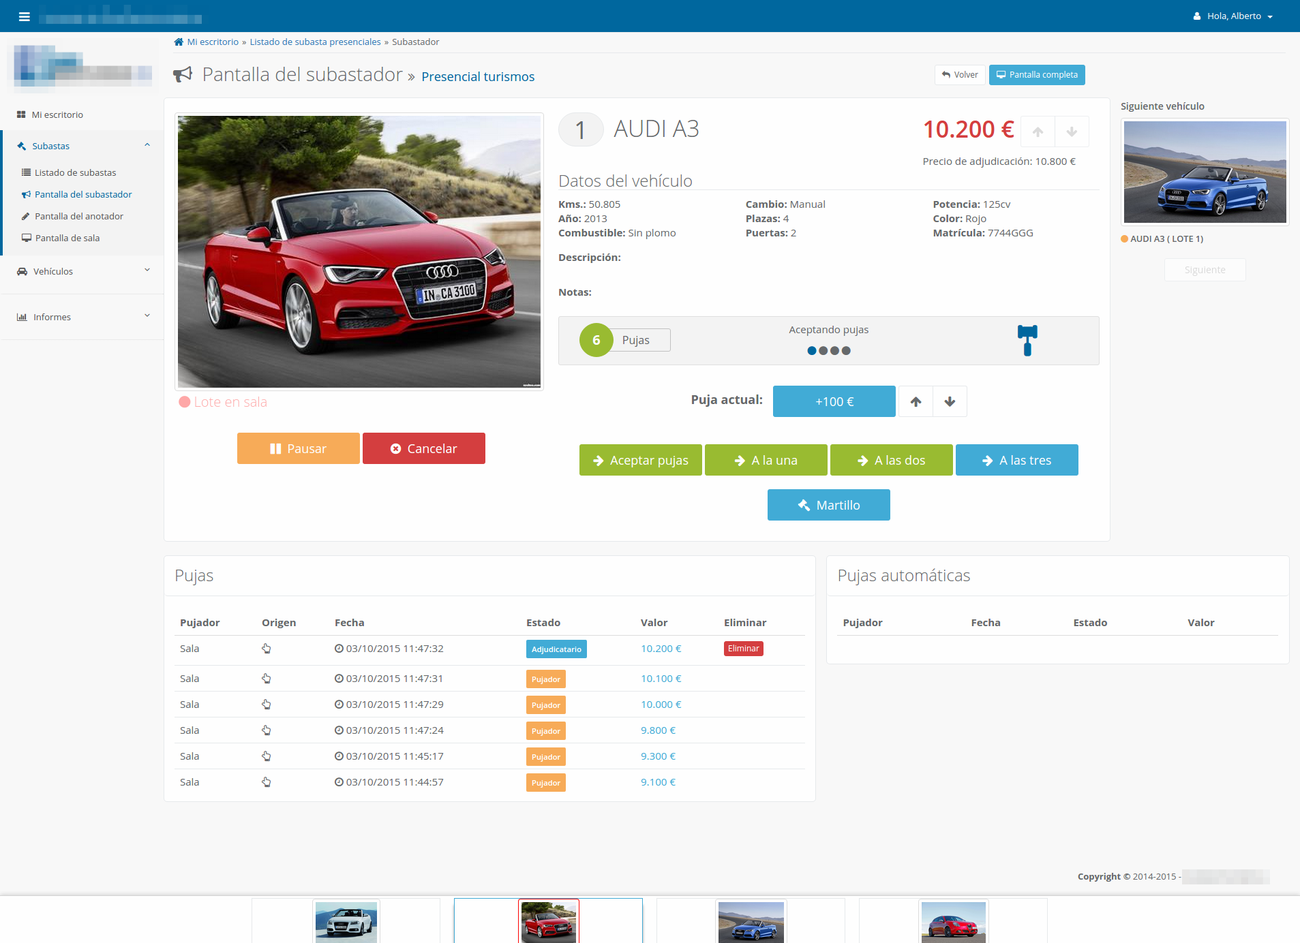 Web application for live onsite and online car auctions